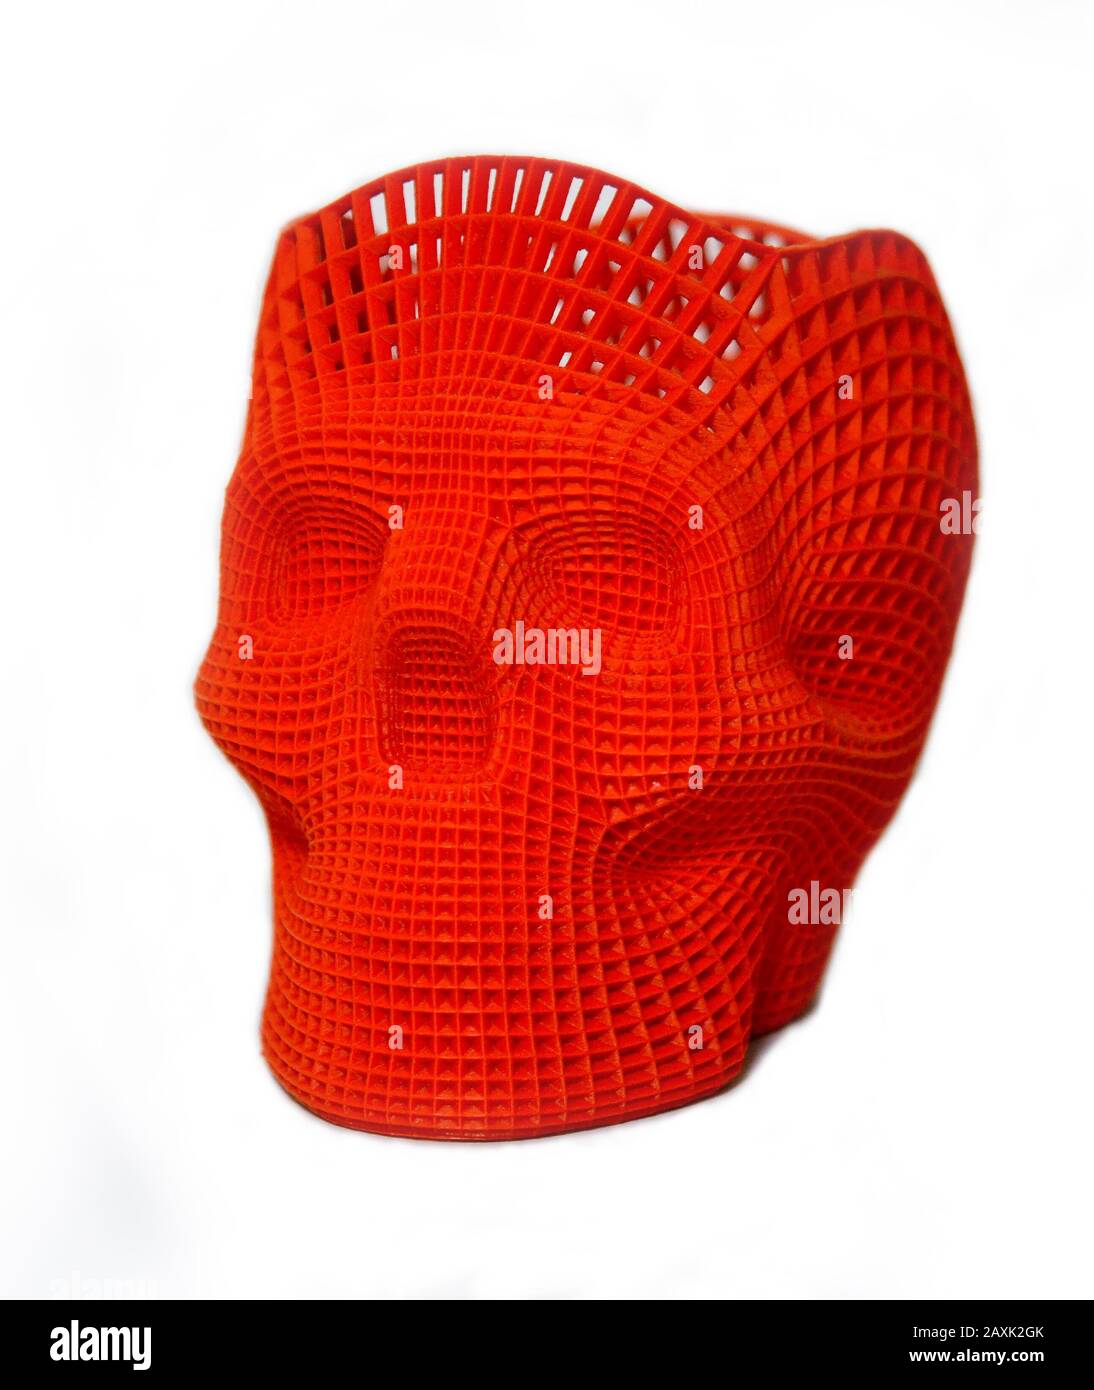 Skull printed with plastic of red color on a 3d printer Isolated on white background. Stock Photo